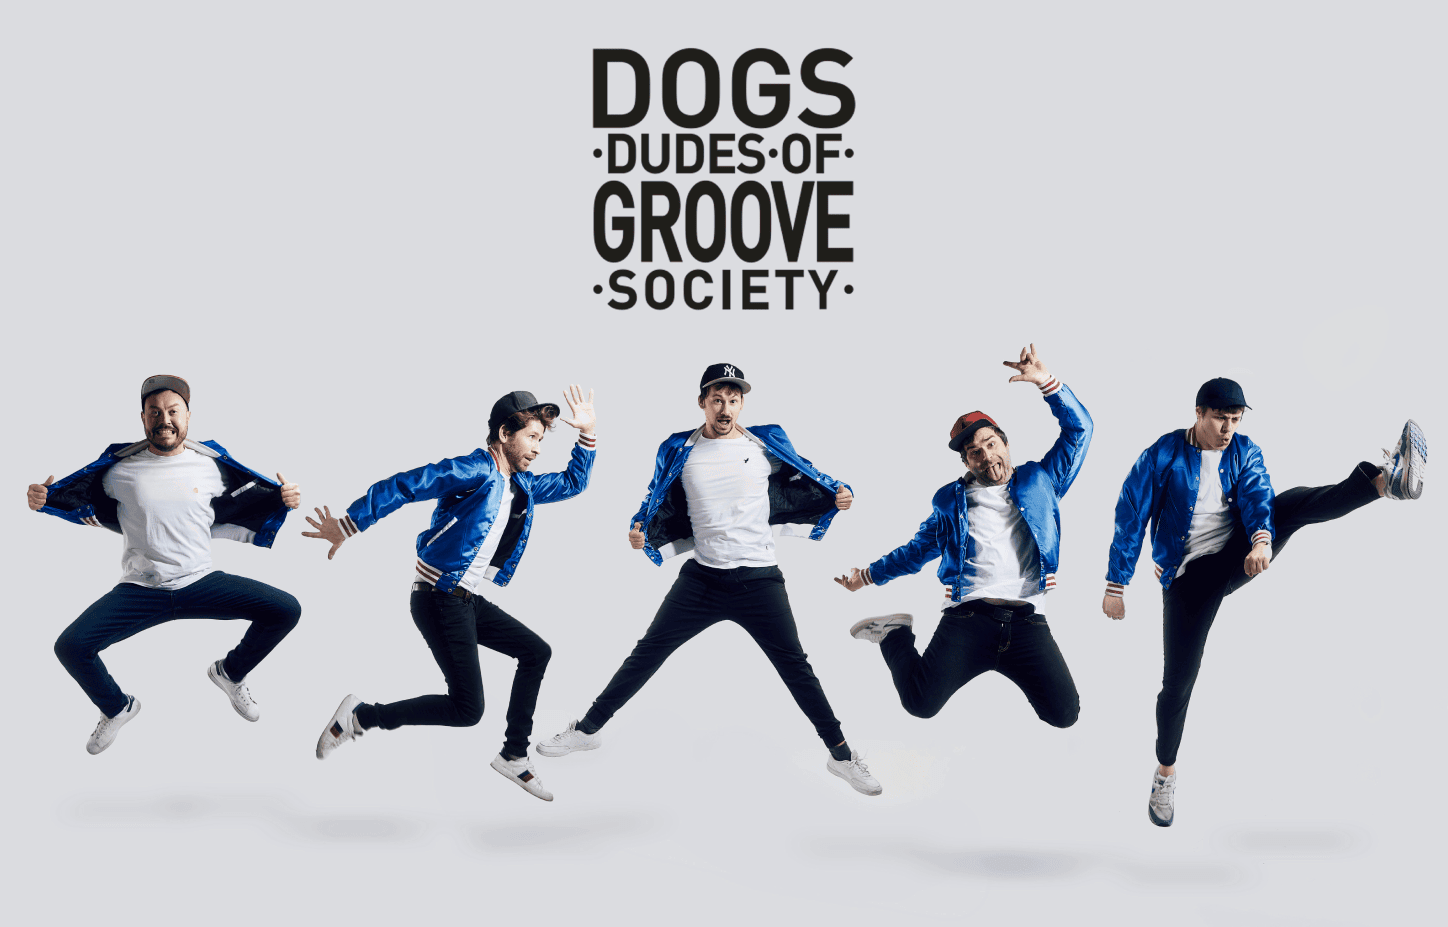 Dudes of Groove Society